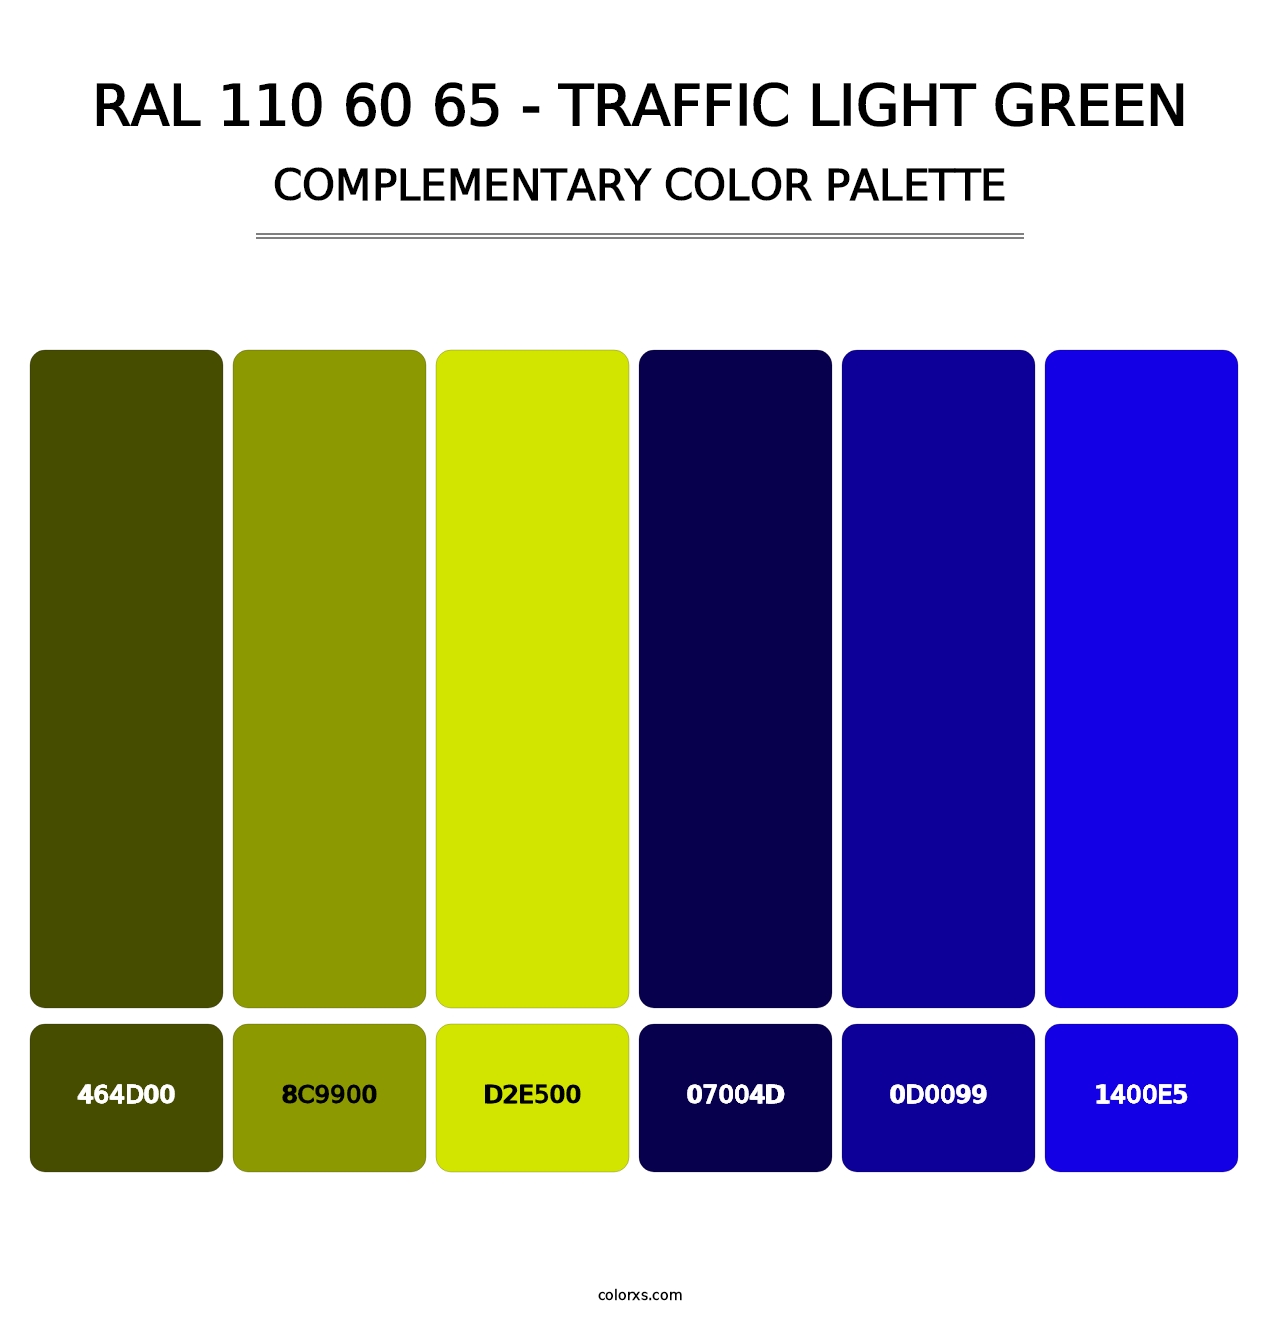 RAL 110 60 65 - Traffic Light Green - Complementary Color Palette